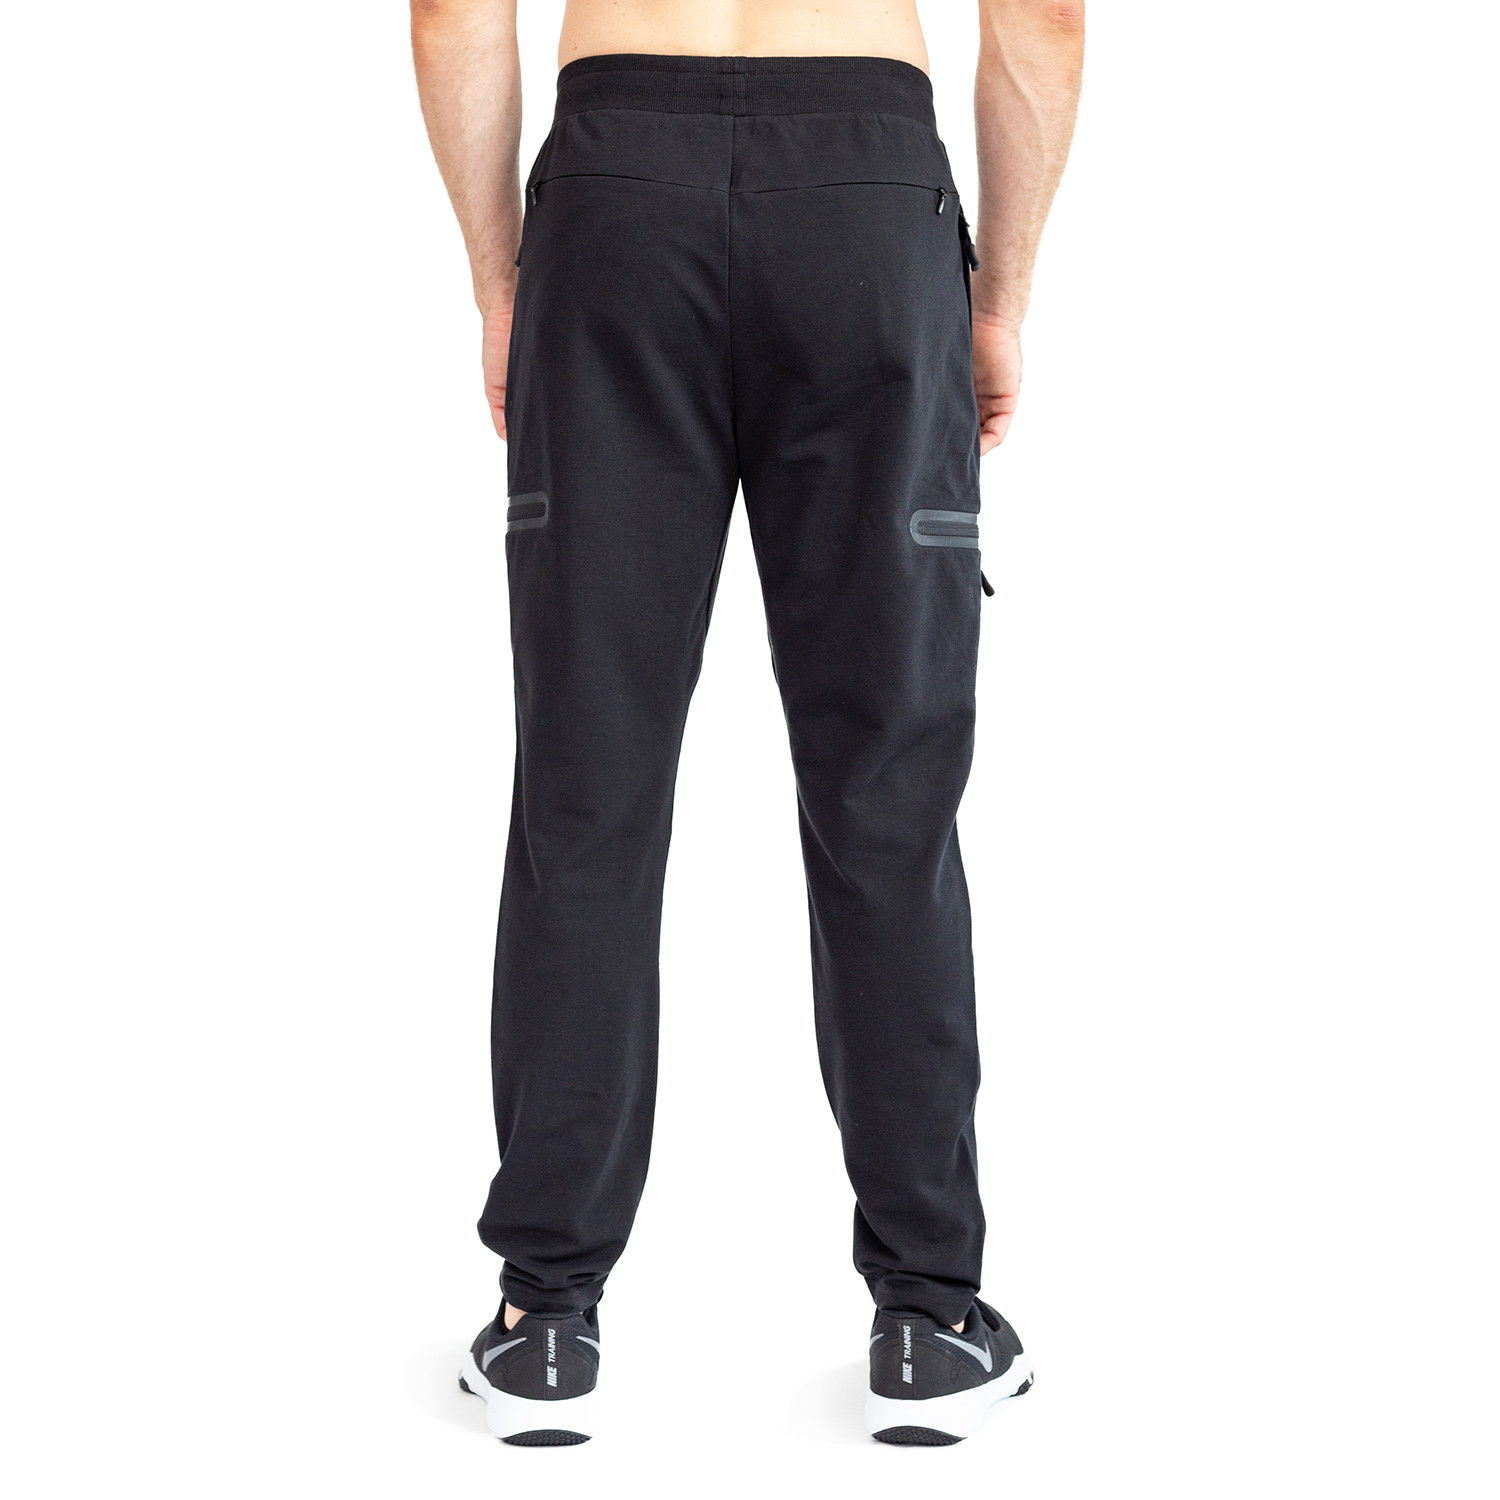 Pixel 1 Track Pant // Black (L) - 9PM Clothing - Touch of Modern